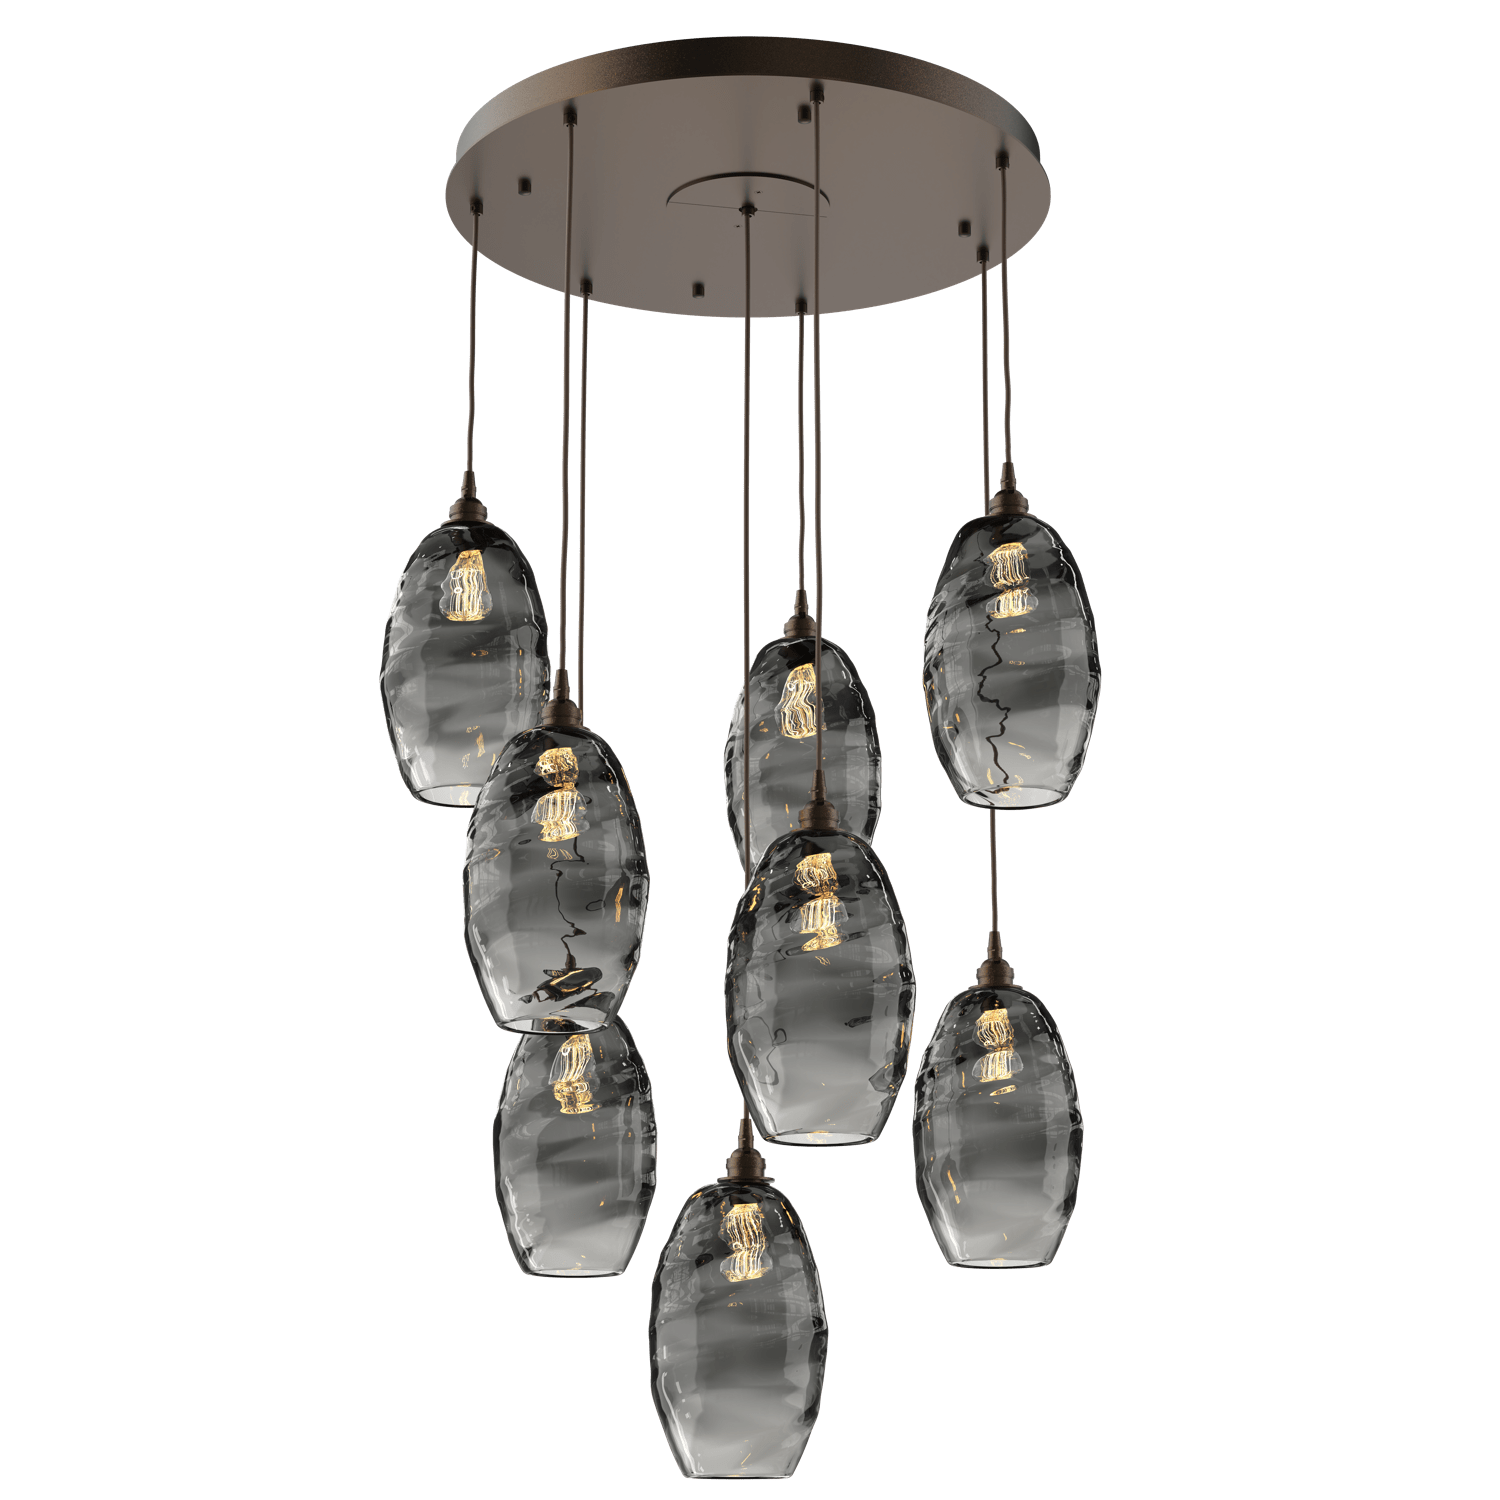 CHB0035-08-FB-OS-Hammerton-Studio-Optic-Blown-Glass-Elisse-8-light-round-pendant-chandelier-with-flat-bronze-finish-and-optic-smoke-blown-glass-shades-and-incandescent-lamping